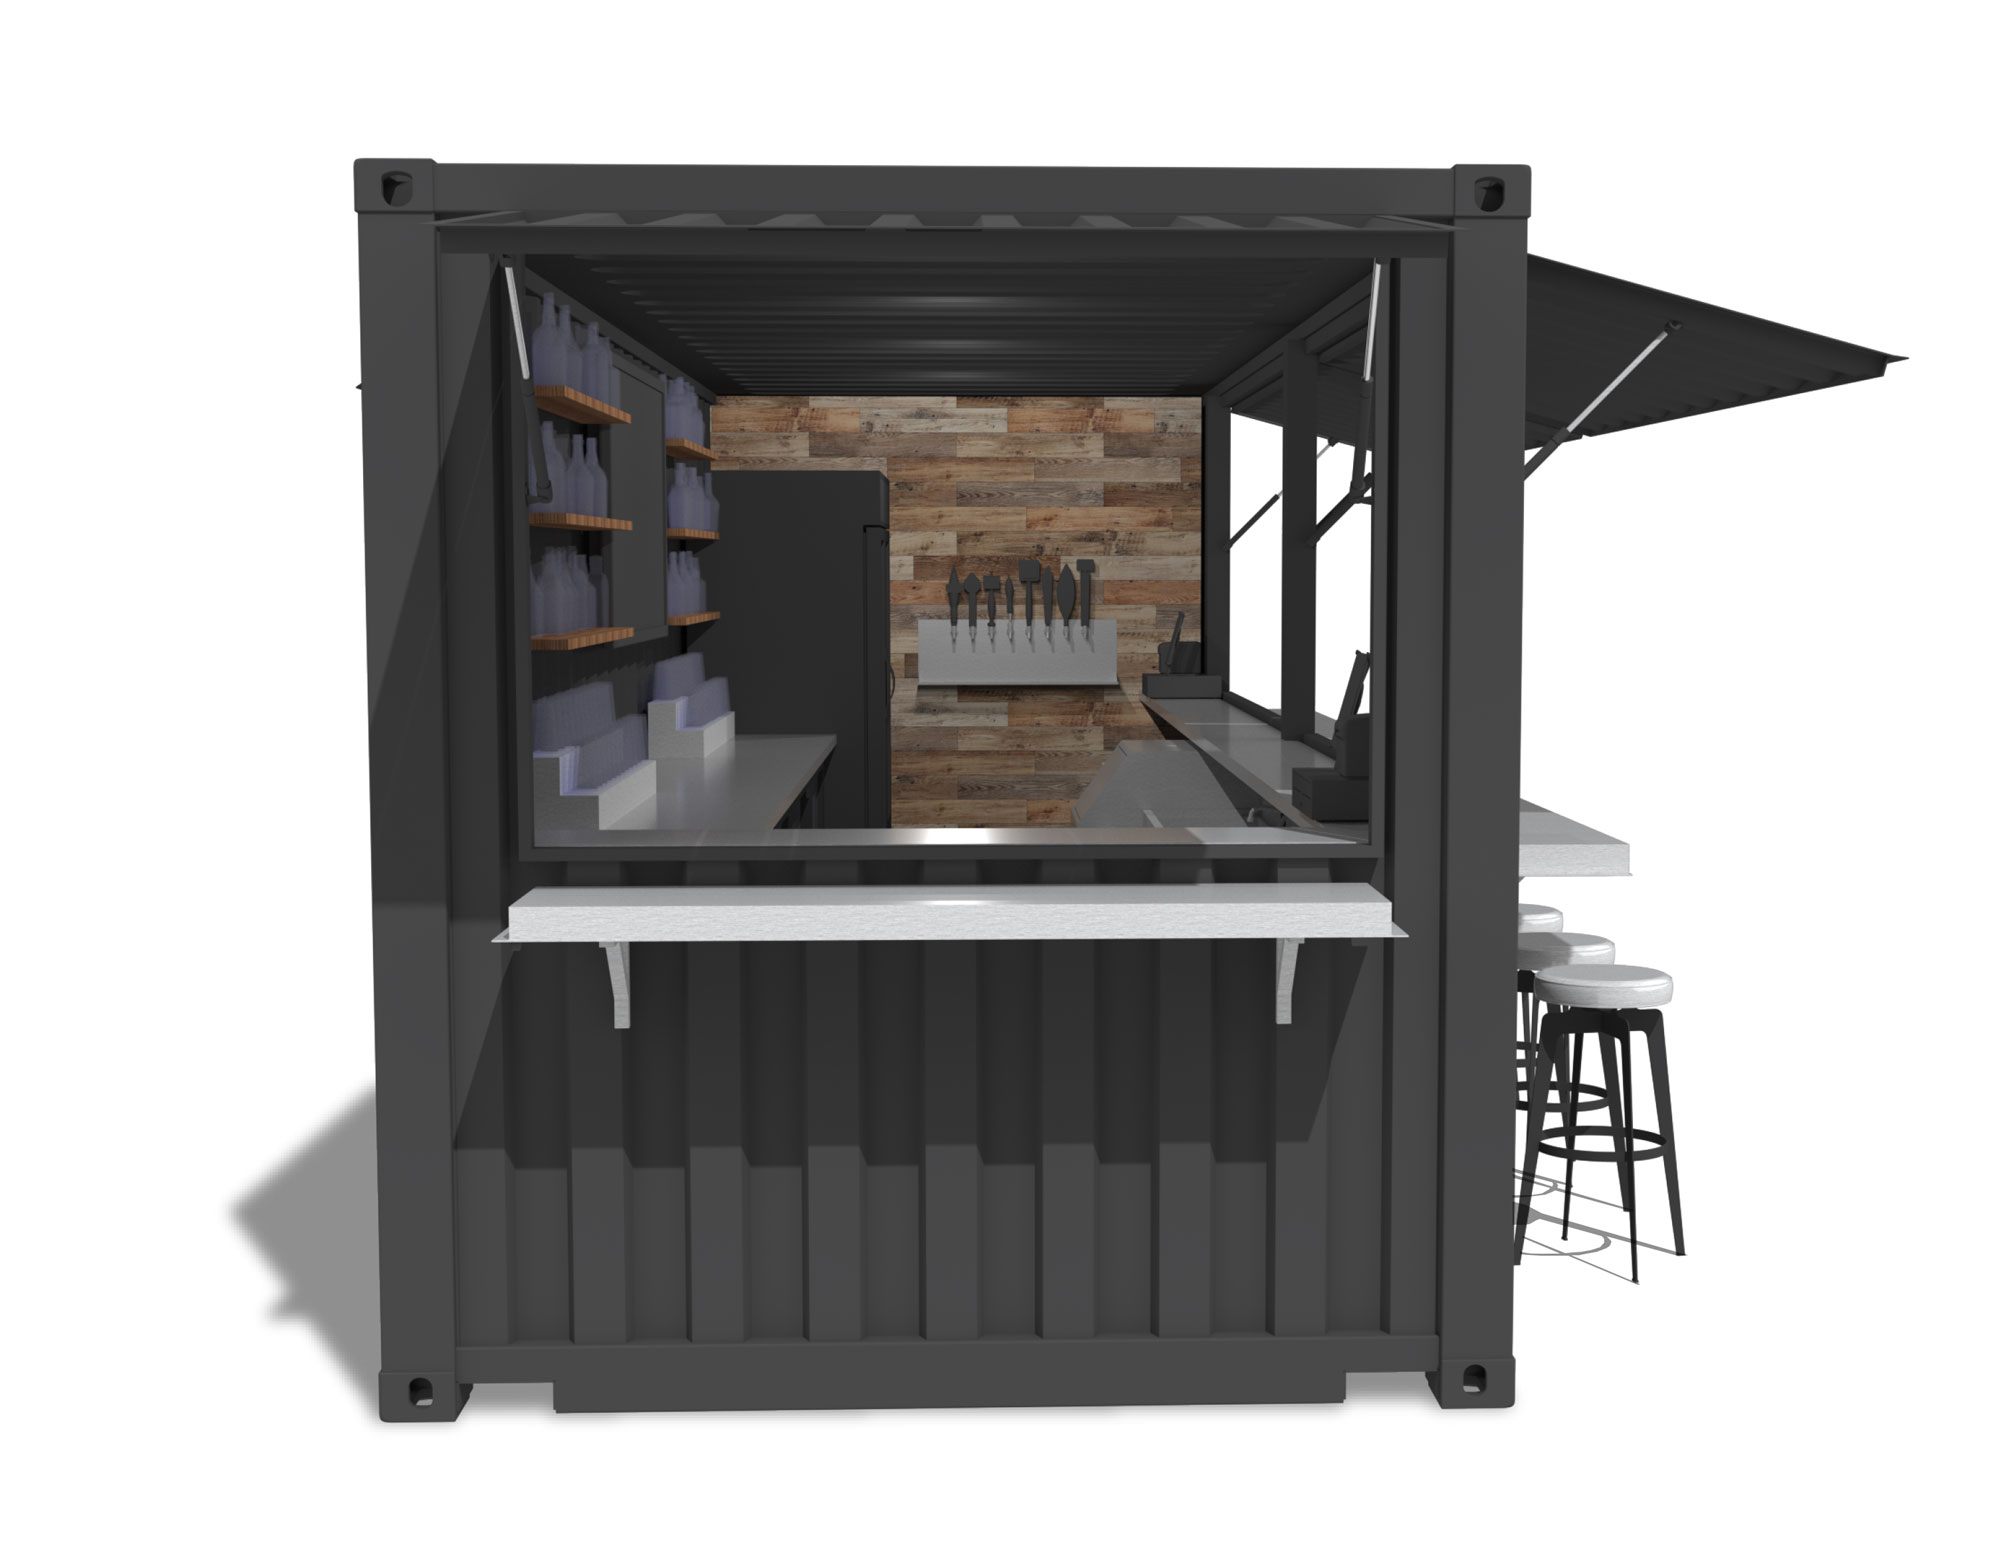 ROXBOX Containers Shipping Container Bar